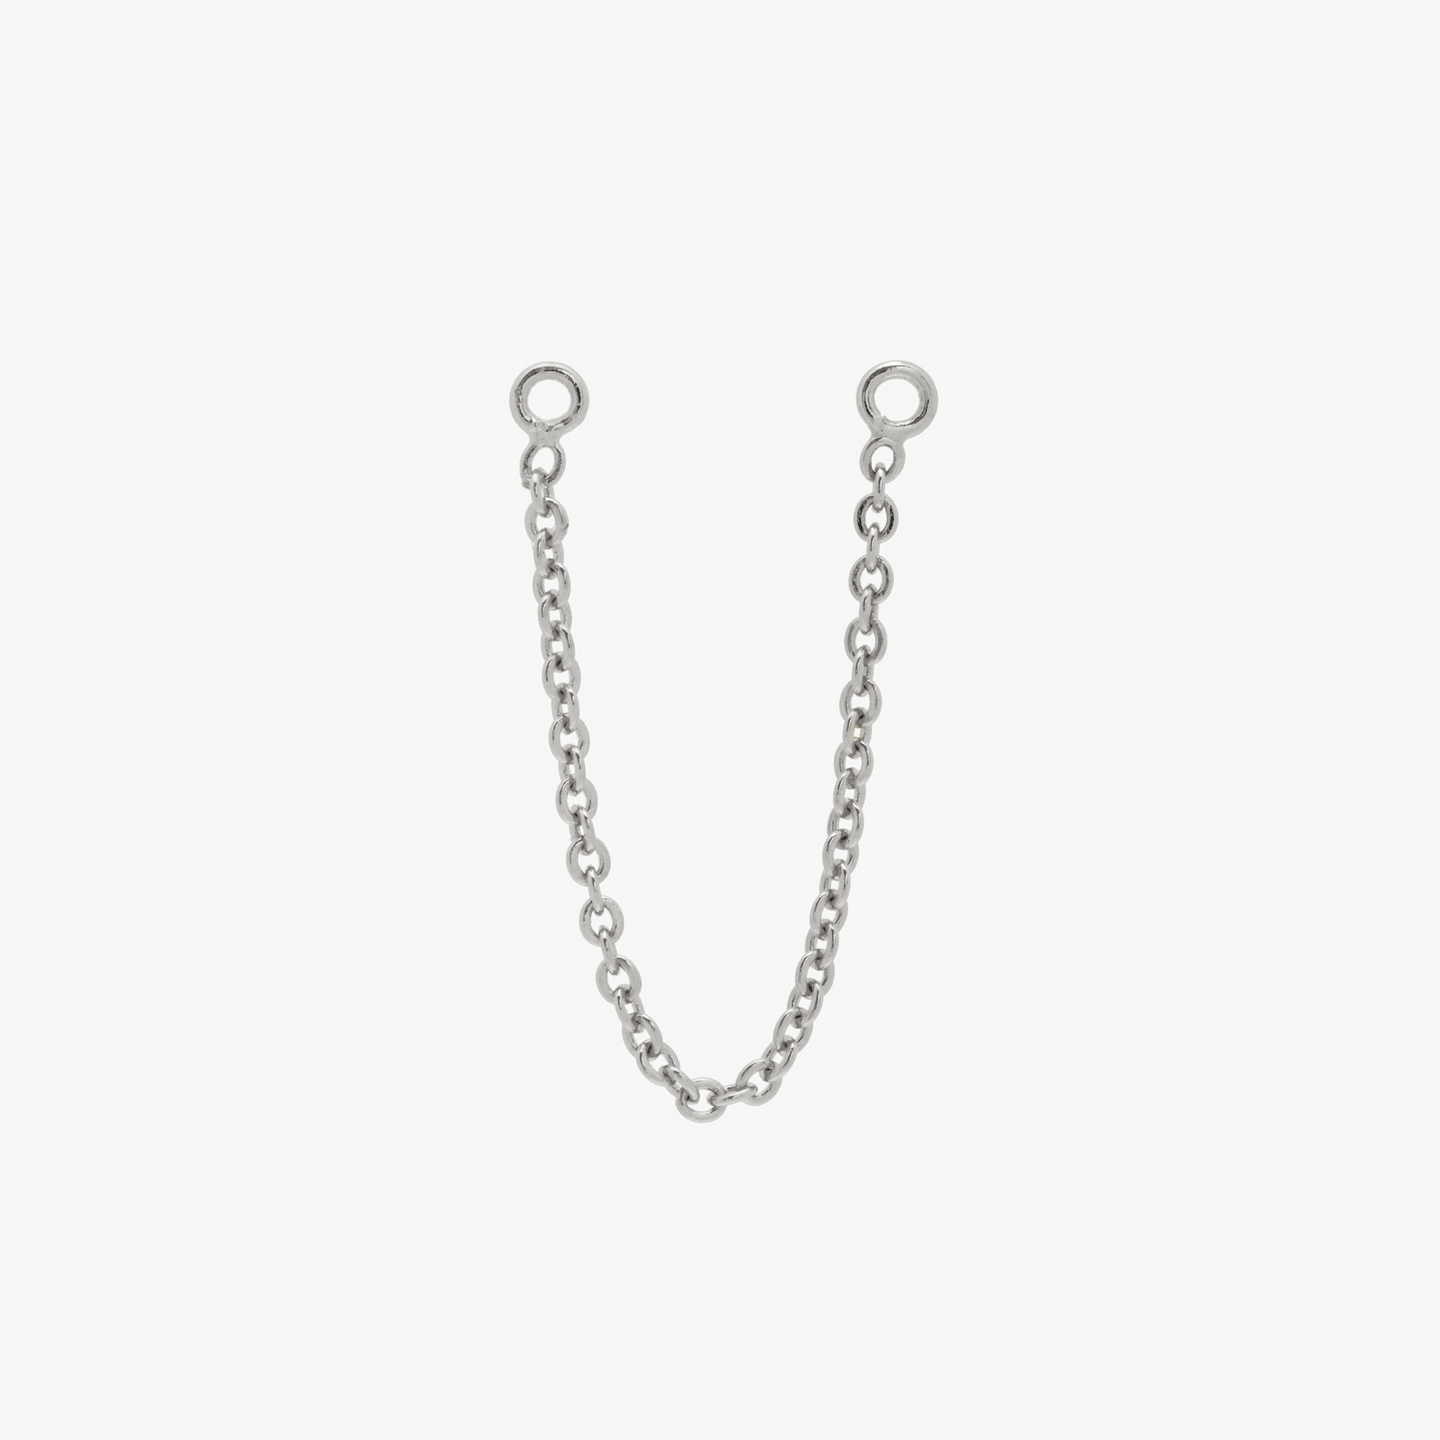 A silver connector chain color:null|45mm|30mm|15mm|60mm|15mm / silver|45mm / silver|30mm / silver|60mm / silver